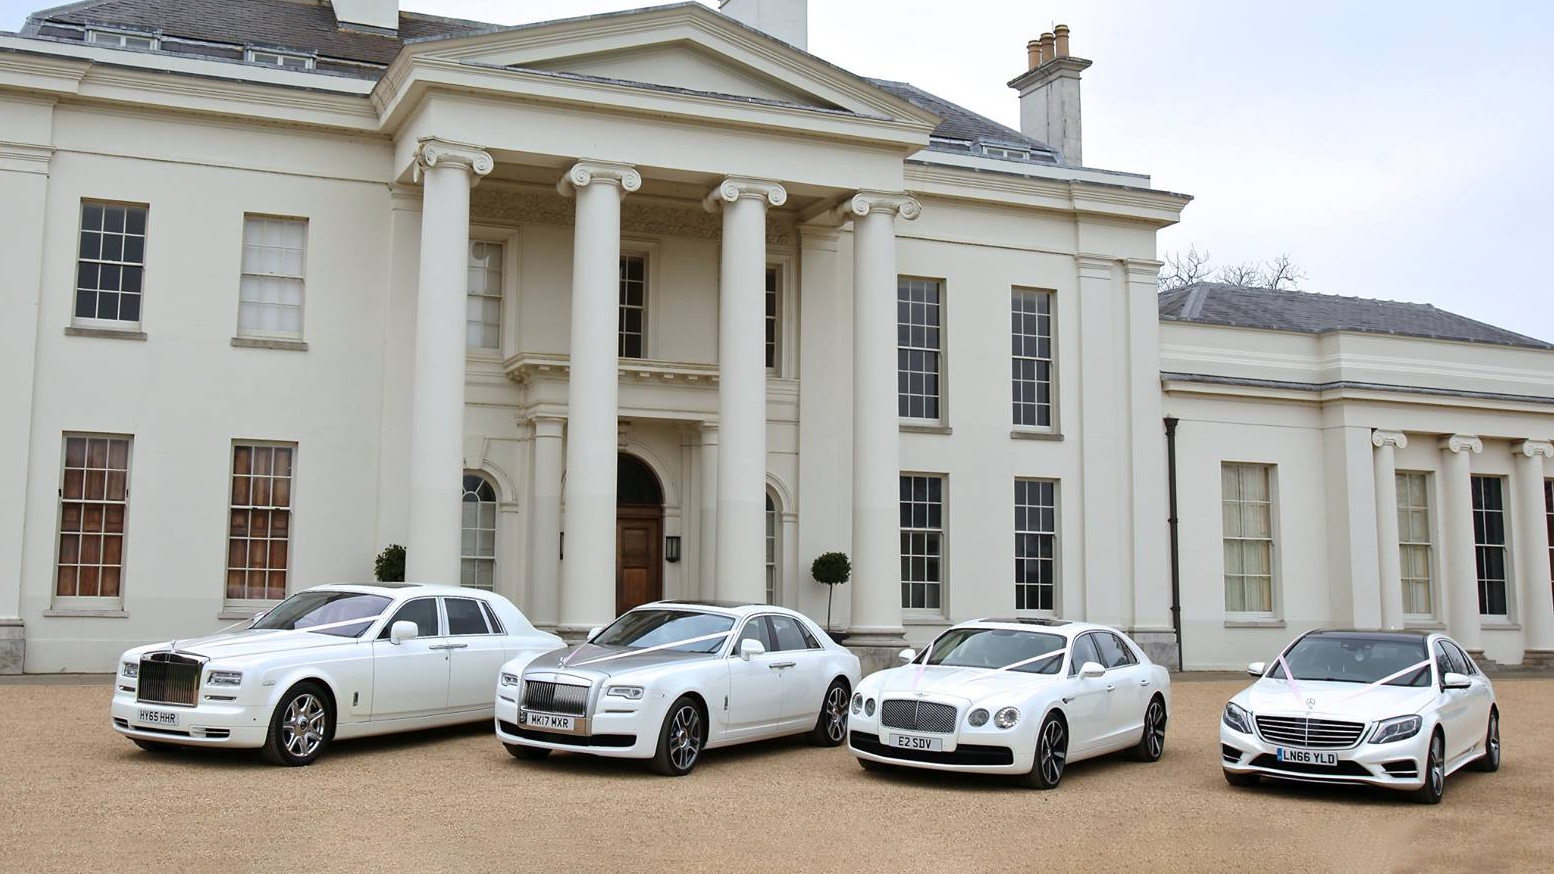 Three Modern Rolls-Royce Phantom and Ghost in White and a White Mercedes in front of a popular wedding venue in Lewisham